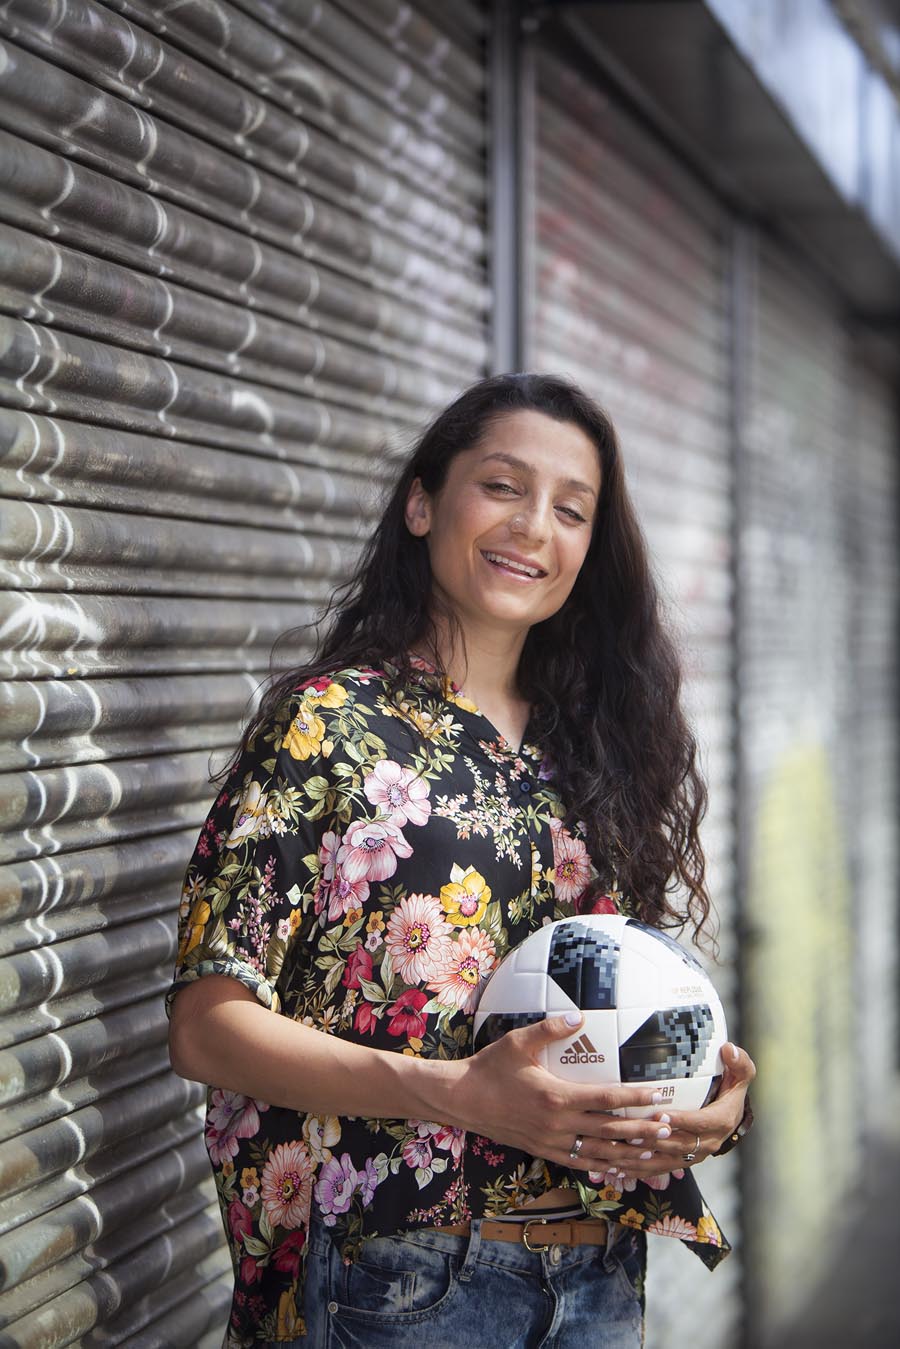  A portrait photograph of footballer Nadia Nadim.   Photographed for Scandinavian Airlines 